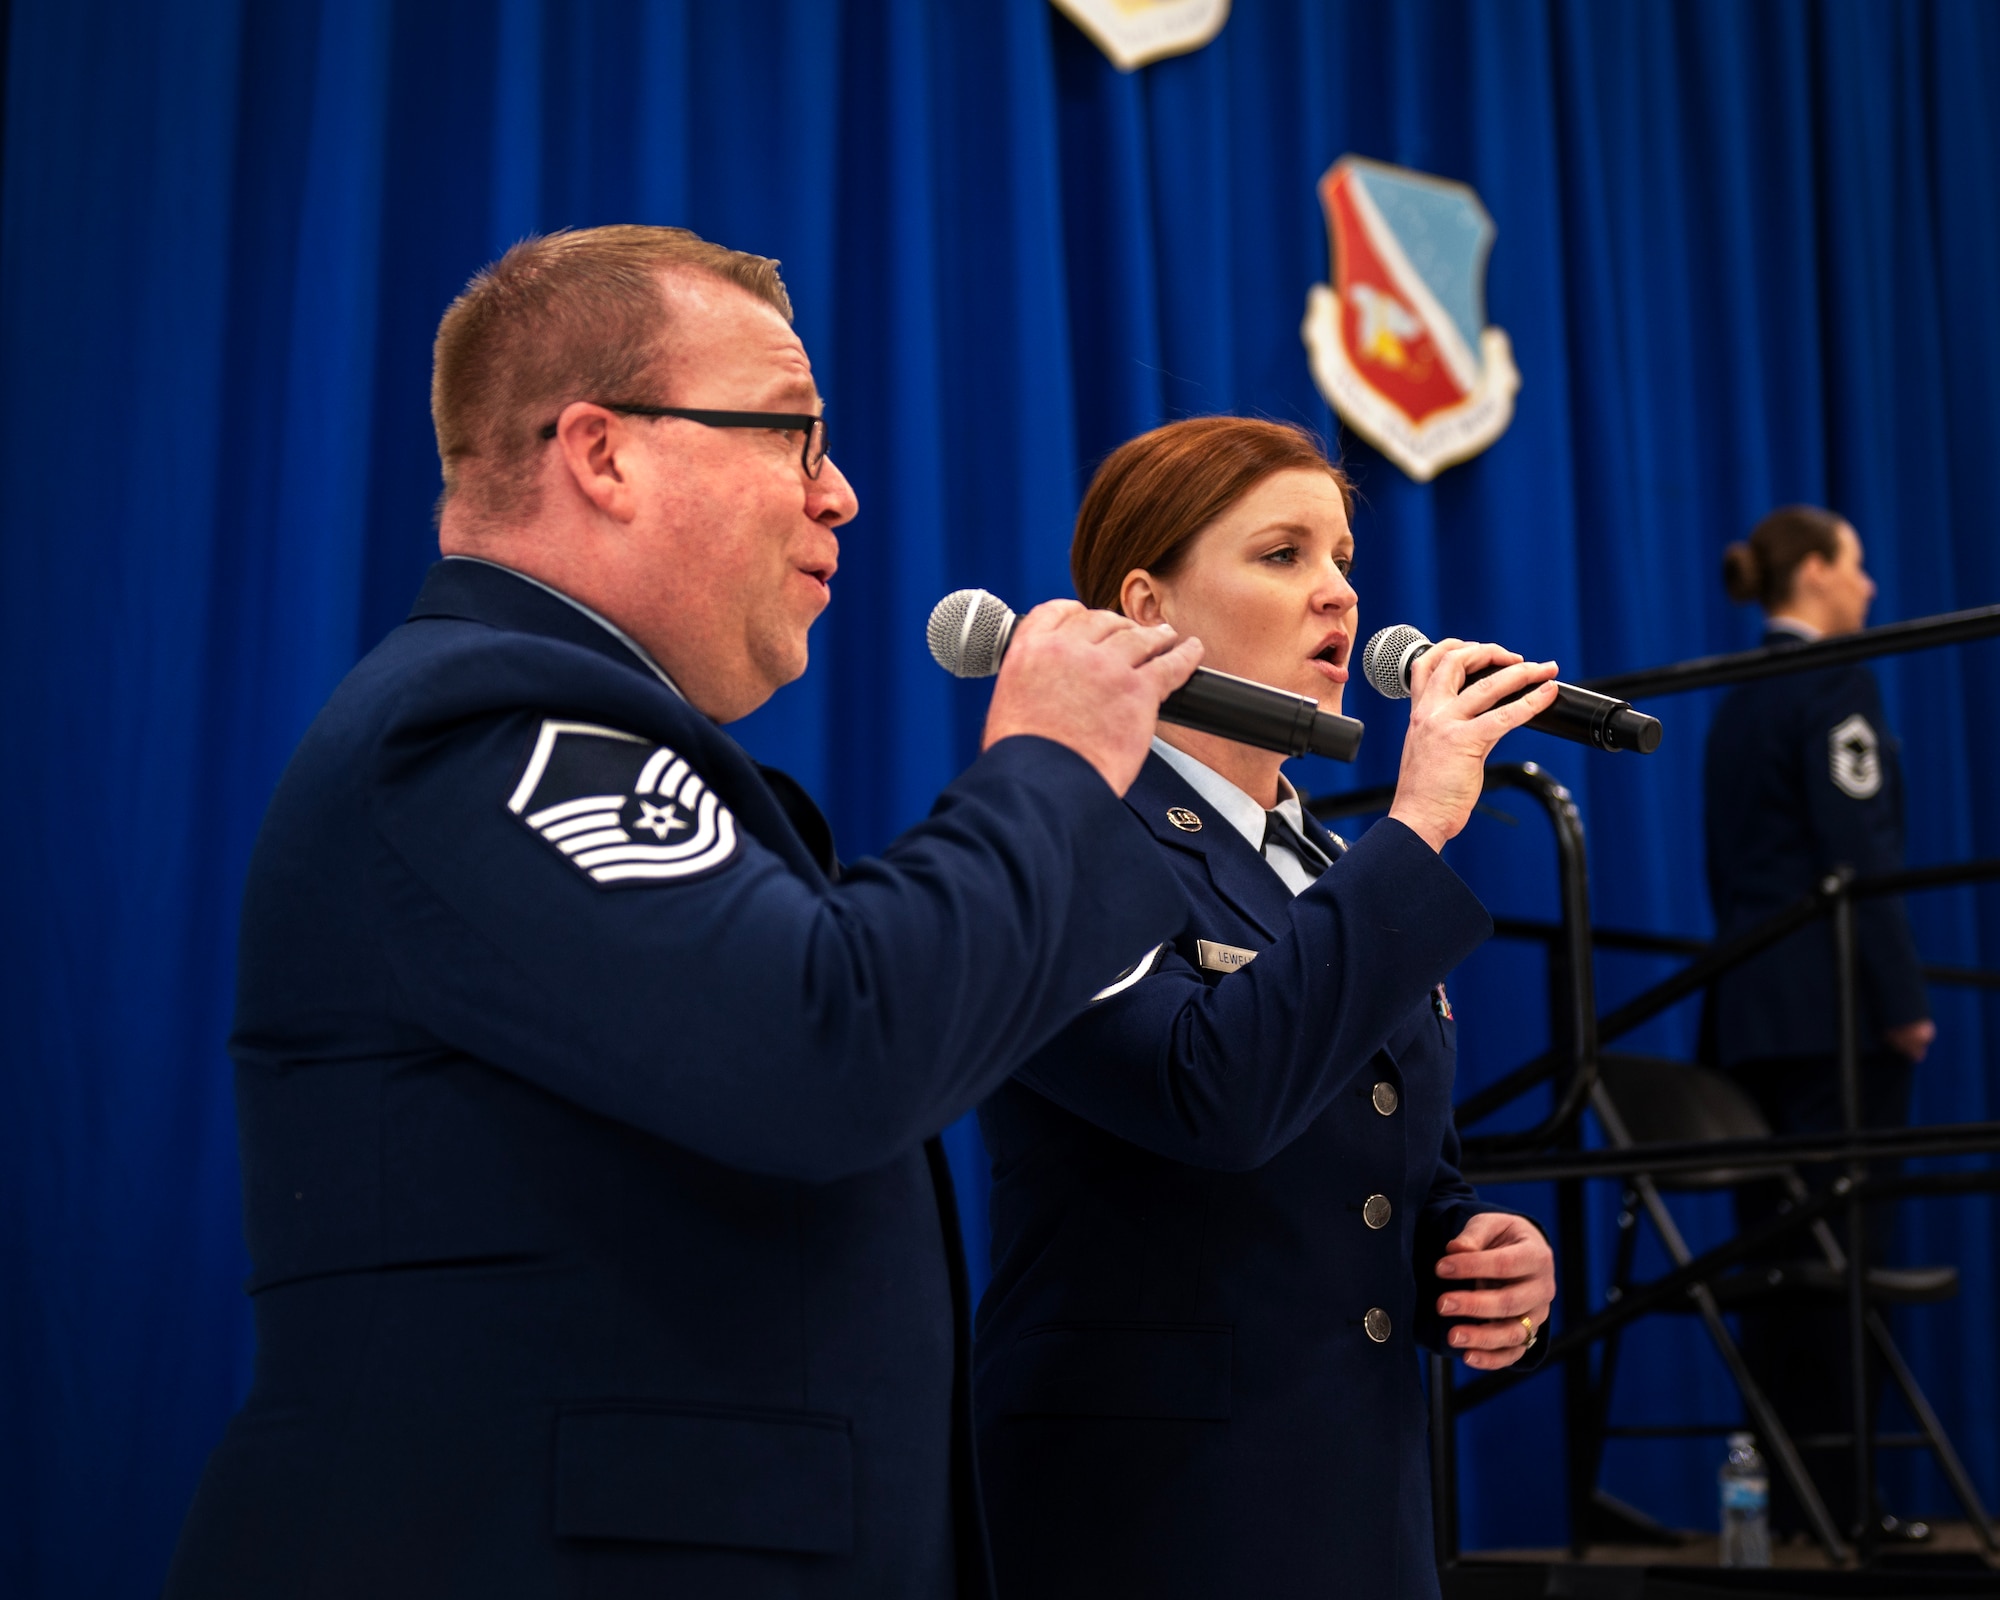 U.S. Air Force Master Sgt. Ryan Ringwelski and Master Sgt. Jessica Lewellen sing the national anthem during a Distinguished Flying Cross Decoration ceremony, Jan. 7, 2023, St. Paul, Minn.